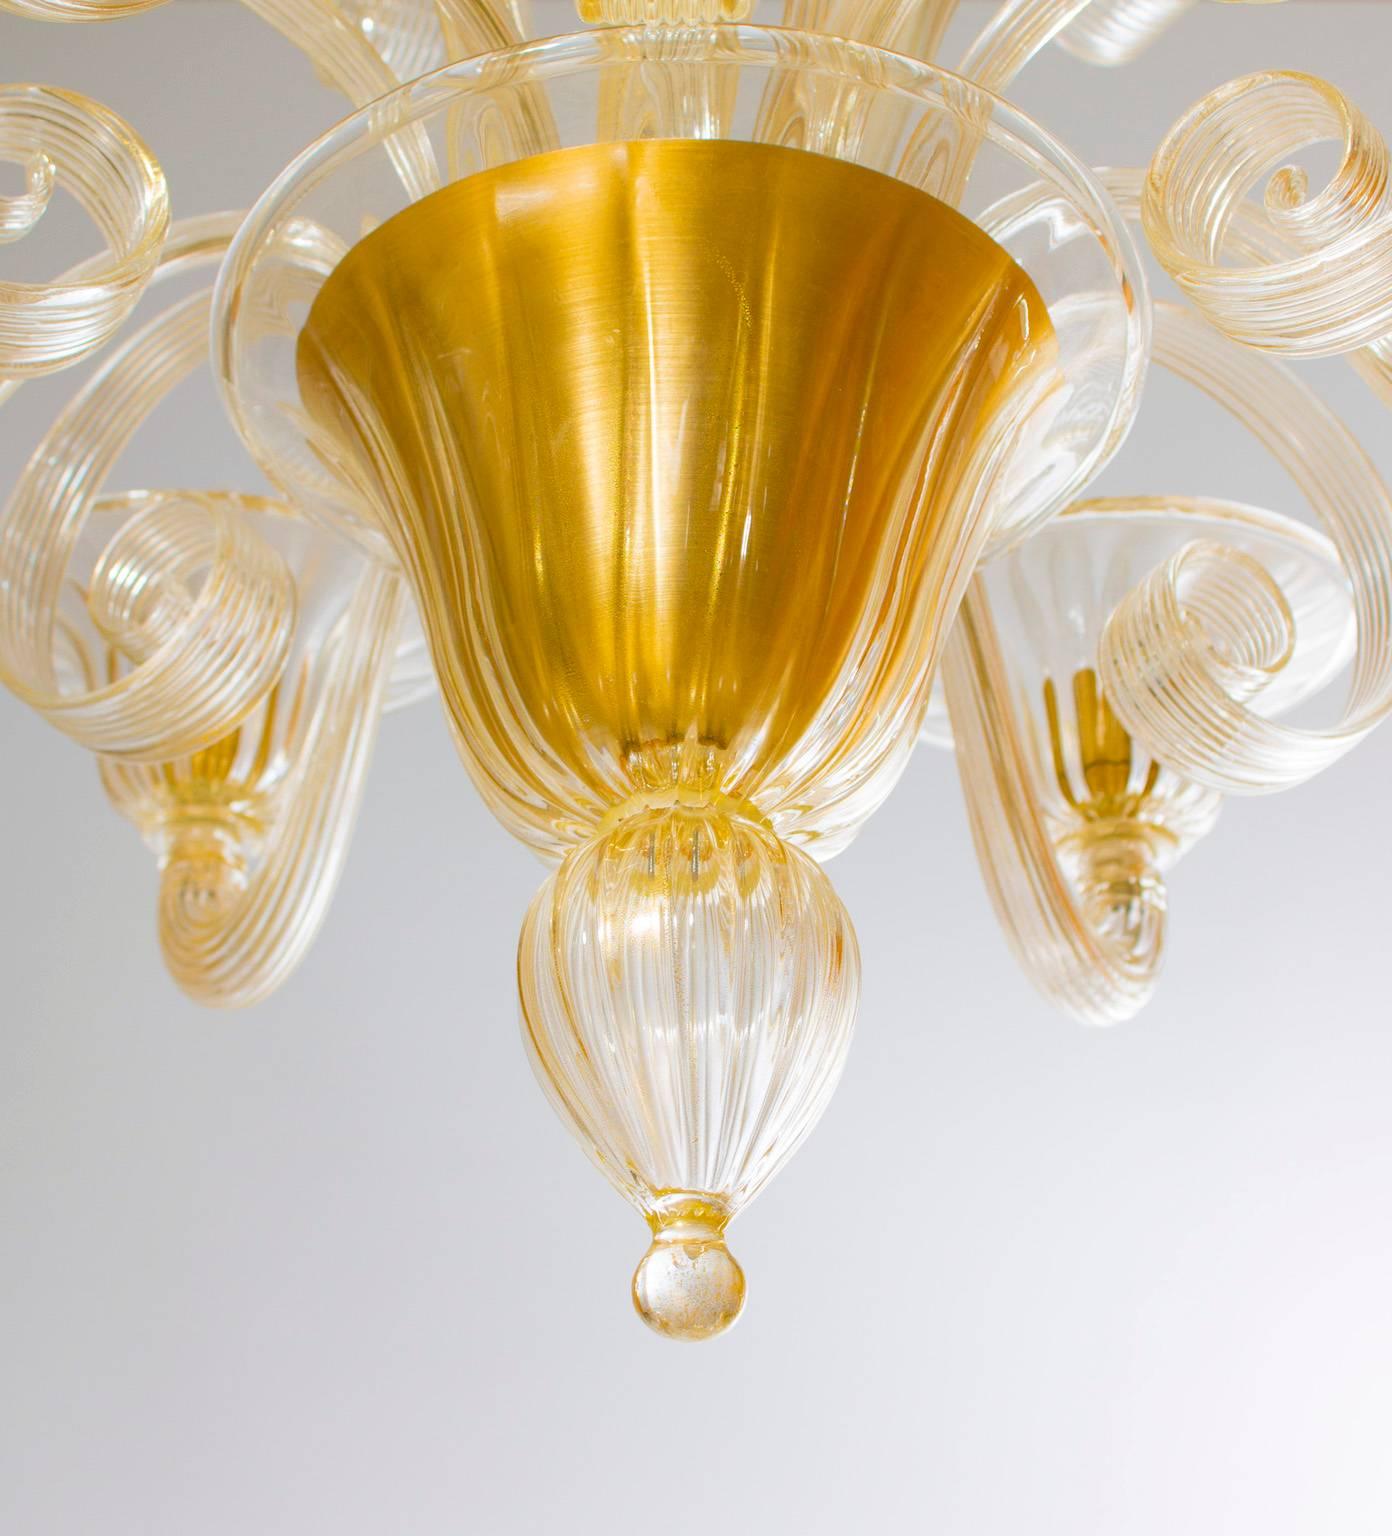 Art Glass Crafted Blown Murano Glass Chandelier adorned with Gold Pastorals 1990s Italy  For Sale